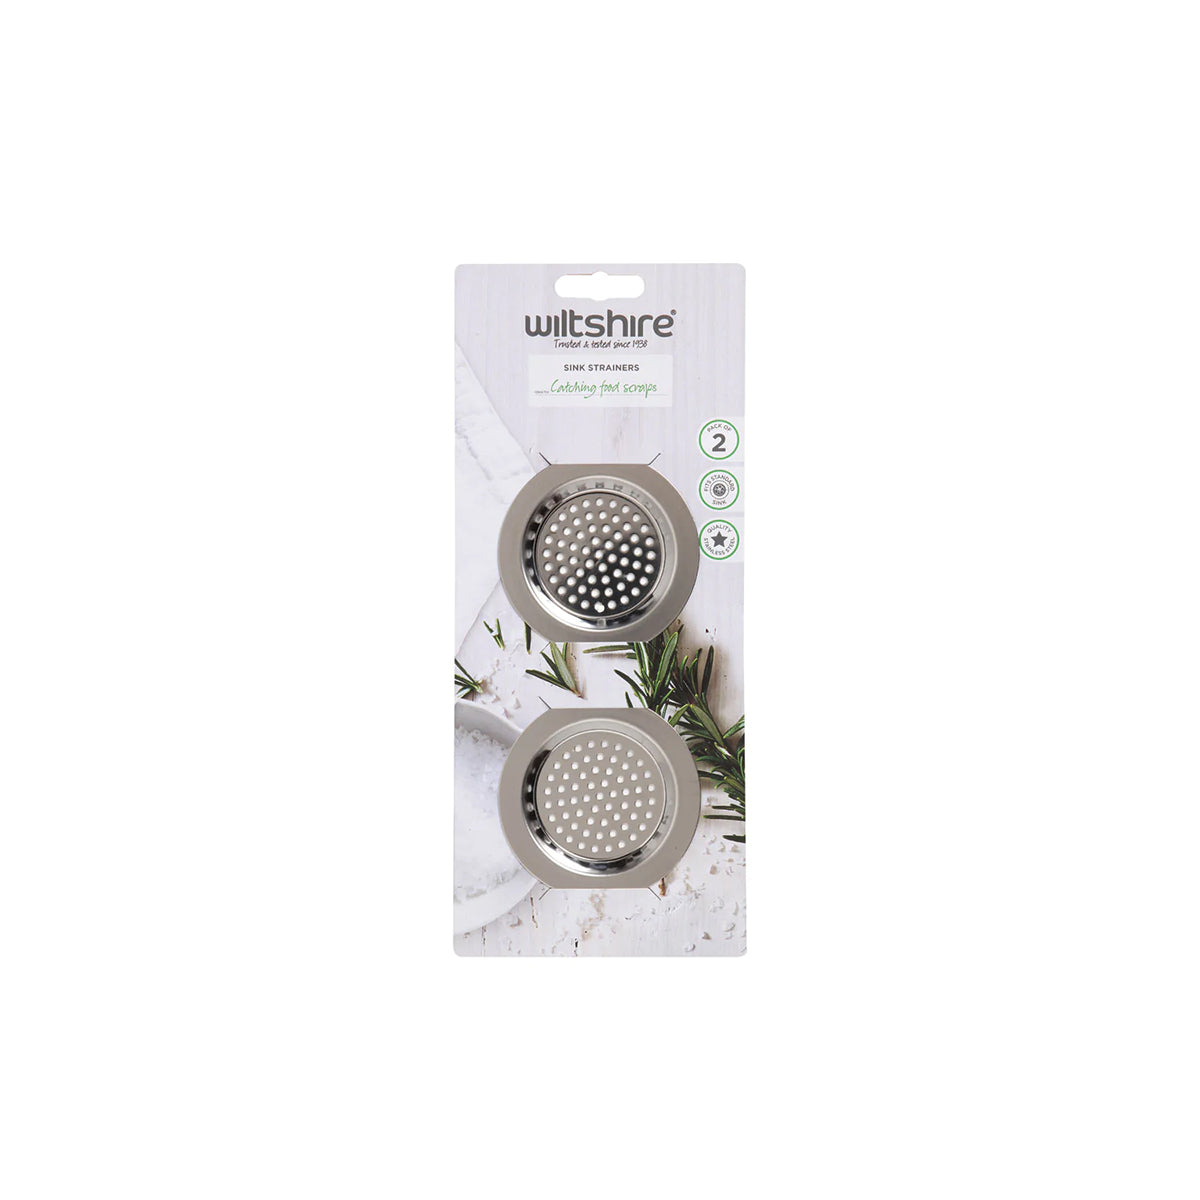 WLT43213 Wiltshire Sink Strainer Pack Of 2 Tomkin Australia Hospitality Supplies